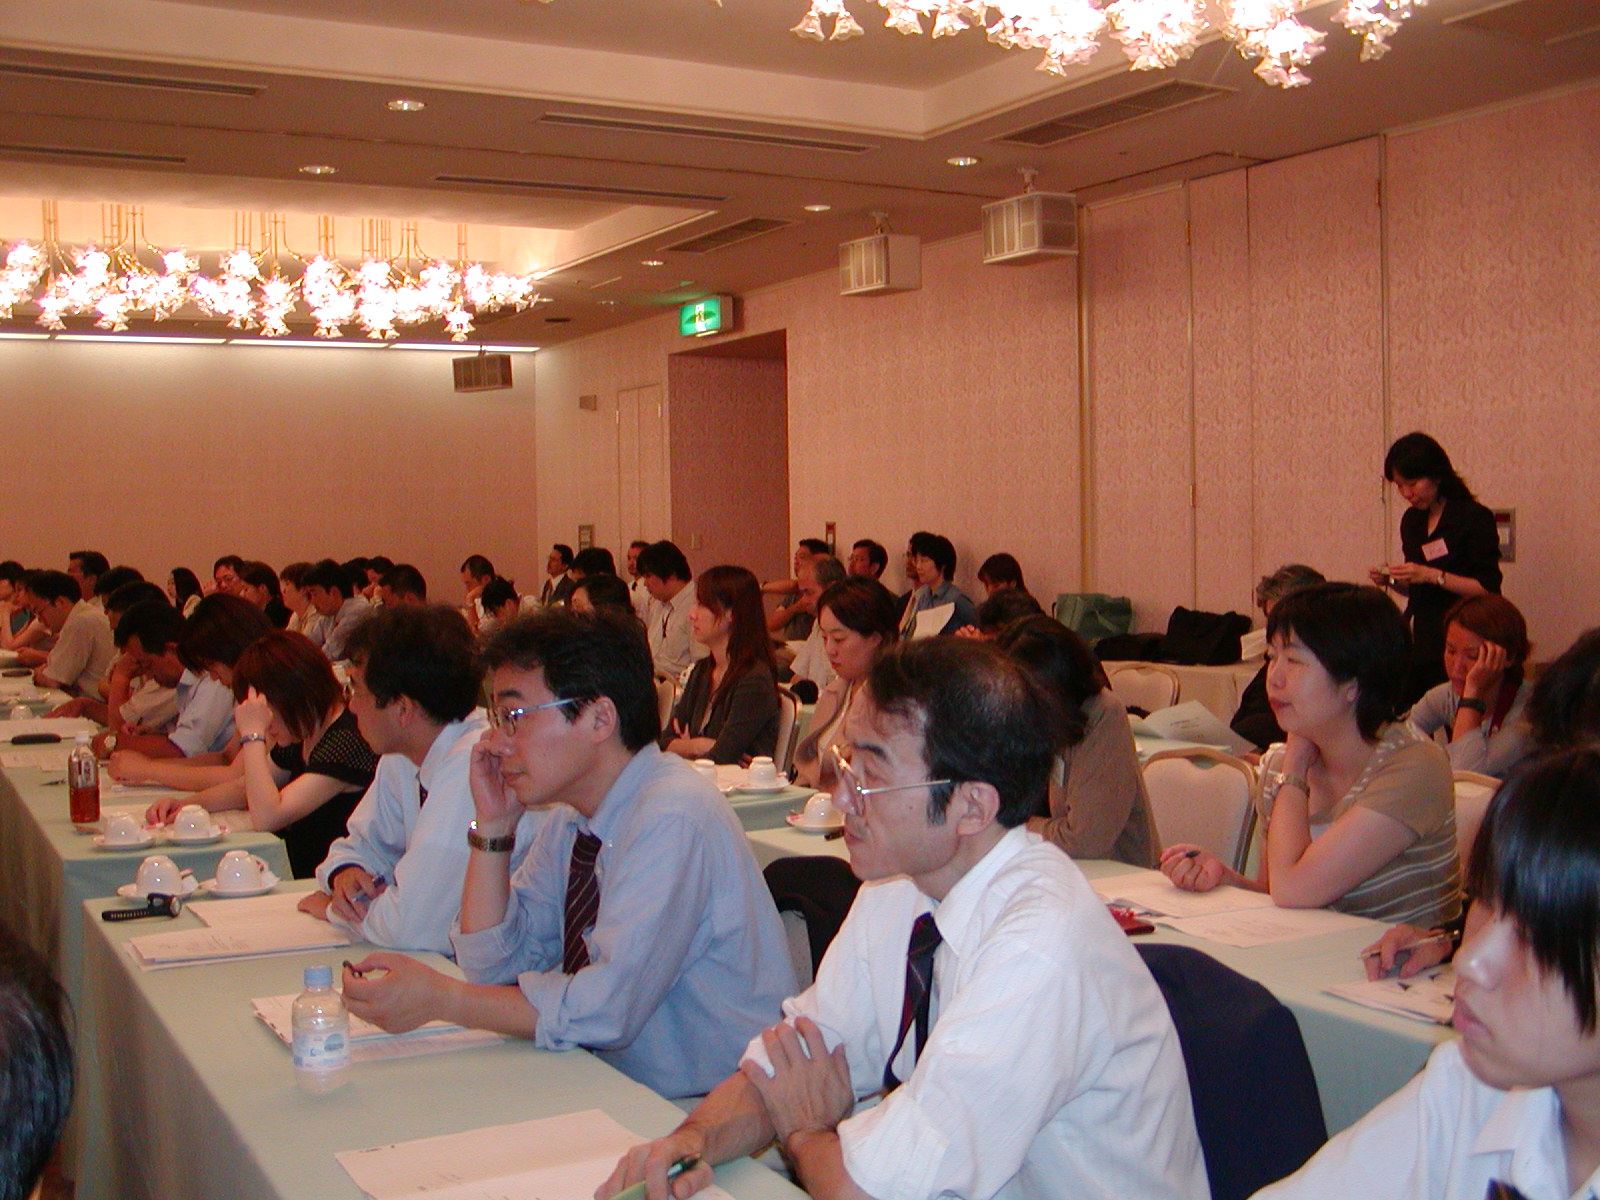 94 people from NGO and trade unions participated in the symposium. (July 26, Ikenohata Bunka Center)